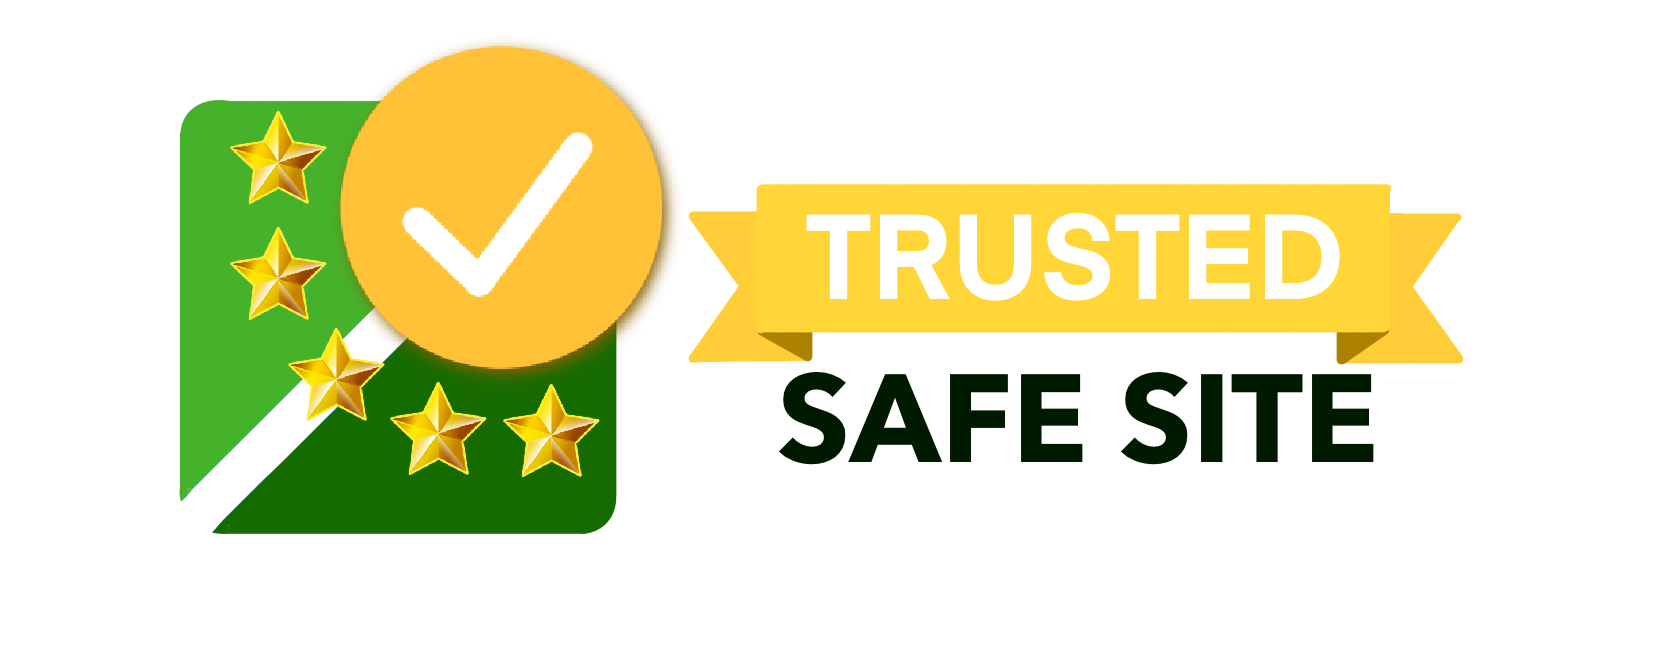 SAFE X TRUSTED SITE 2